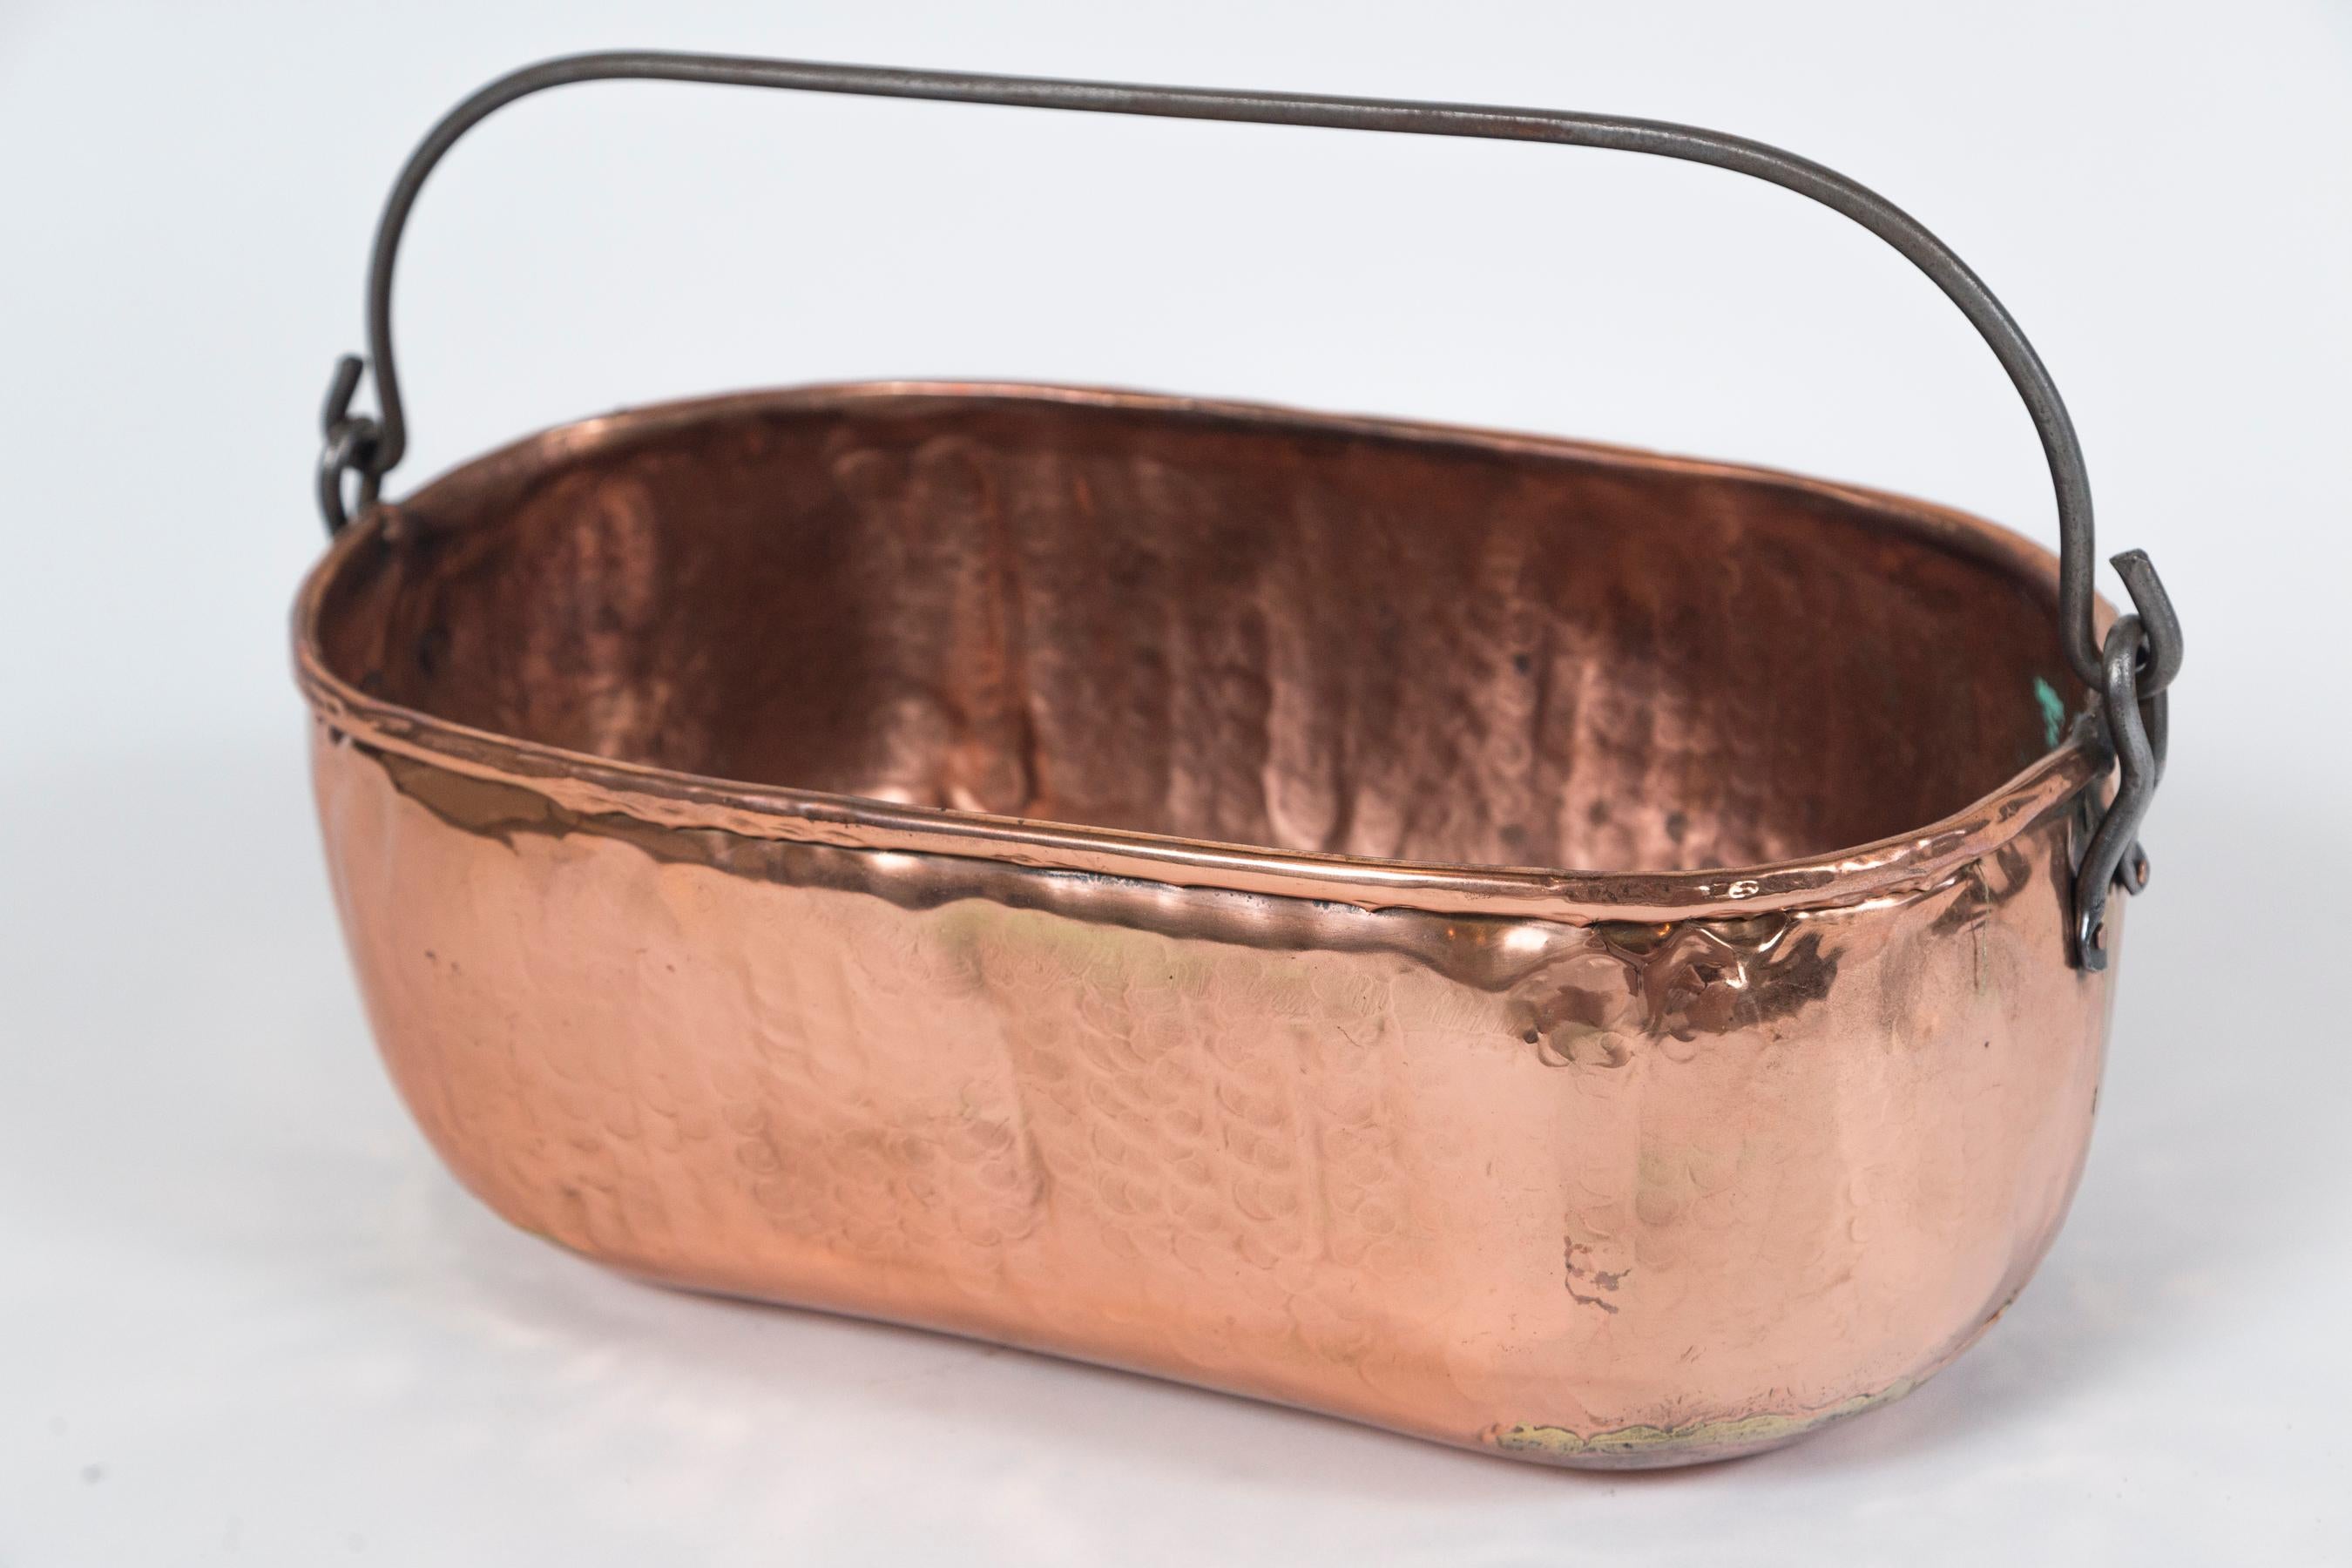 Antique copper oval bucket, circa 1910. Dovetailed sides and bottom, with rolled rim. Iron swing handle.